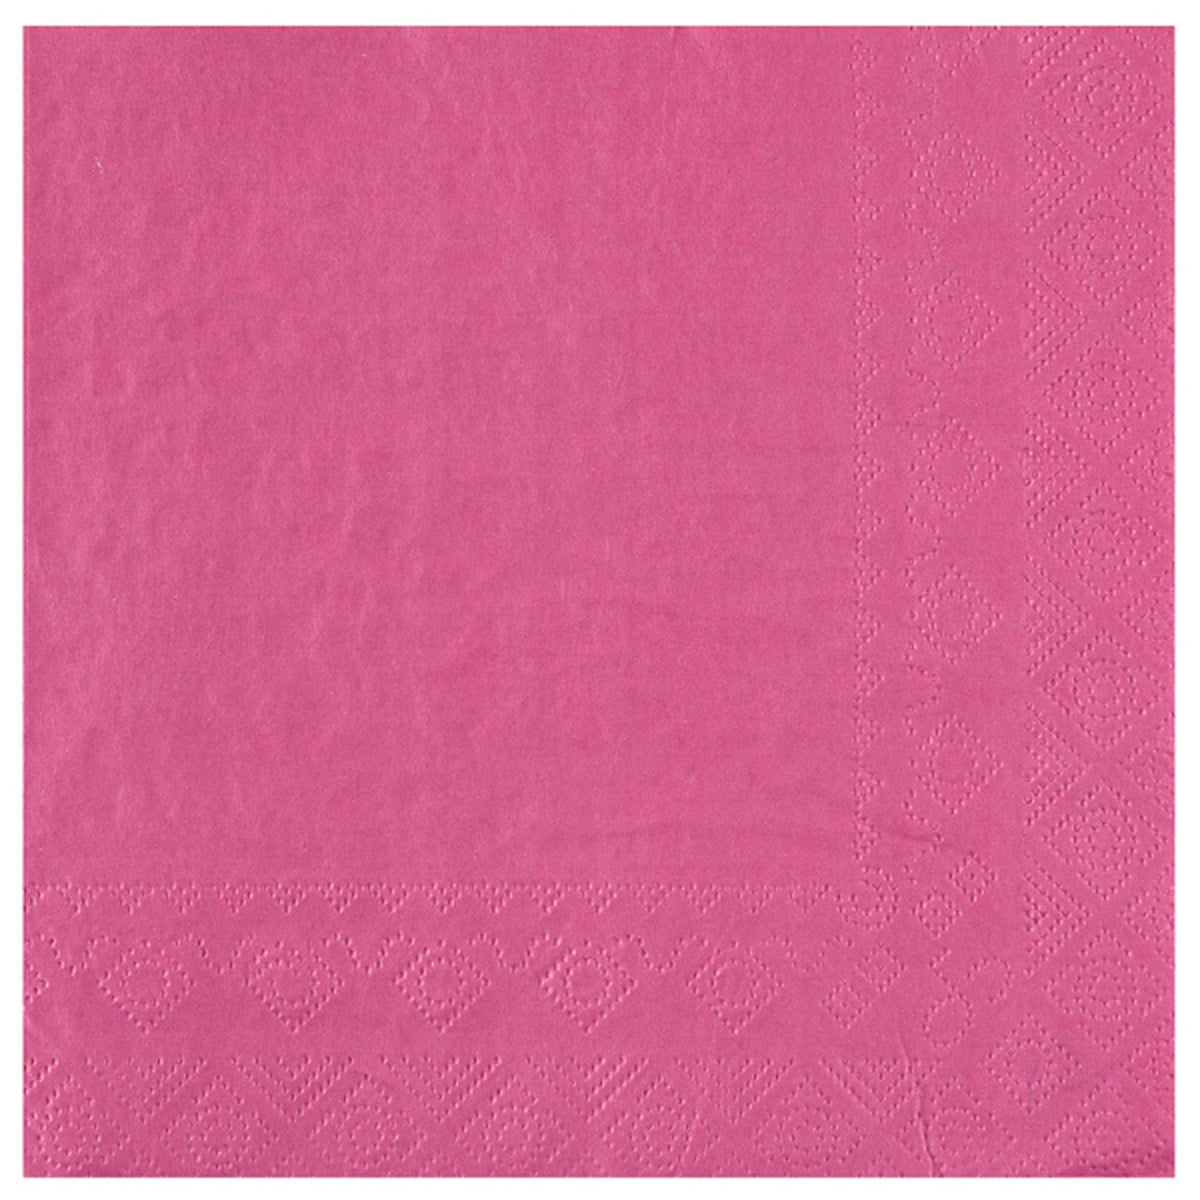 SANTEX Everyday Entertaining Candy Pink Large Lunch Paper Party Napkins, 25 Count